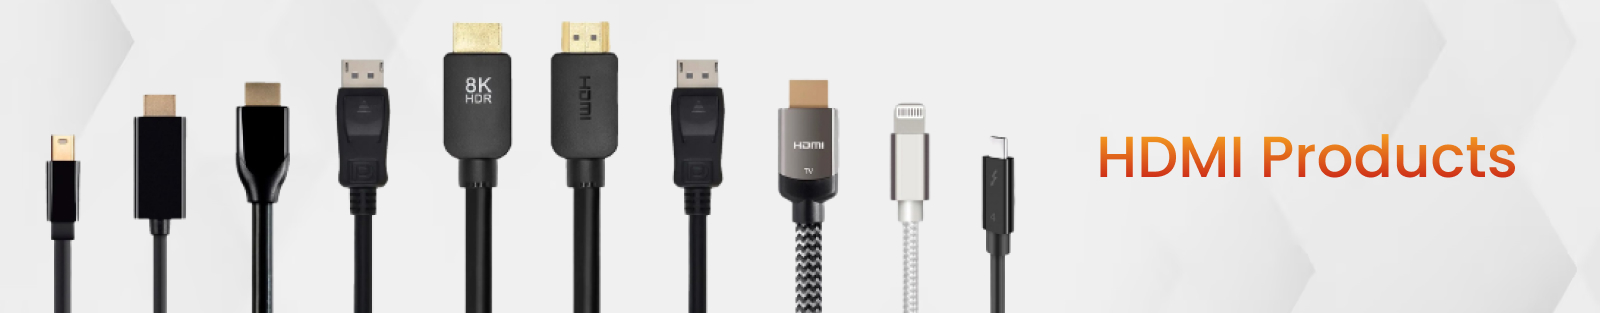 HDMI Products